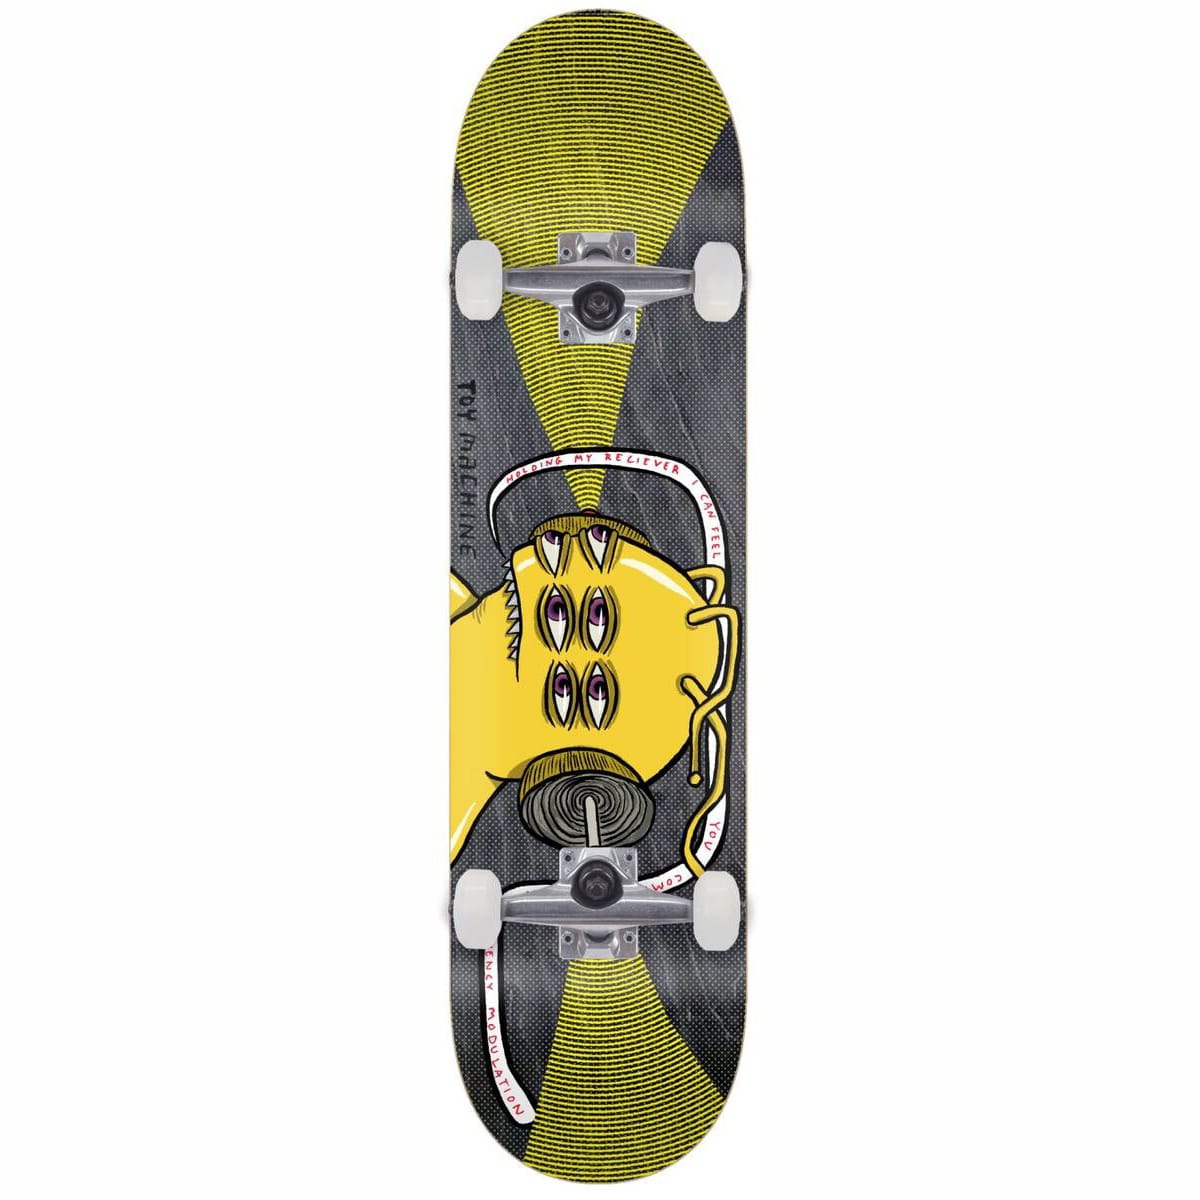 Skateboard complet Toy Machine Frequency Modulation deck 8.25″